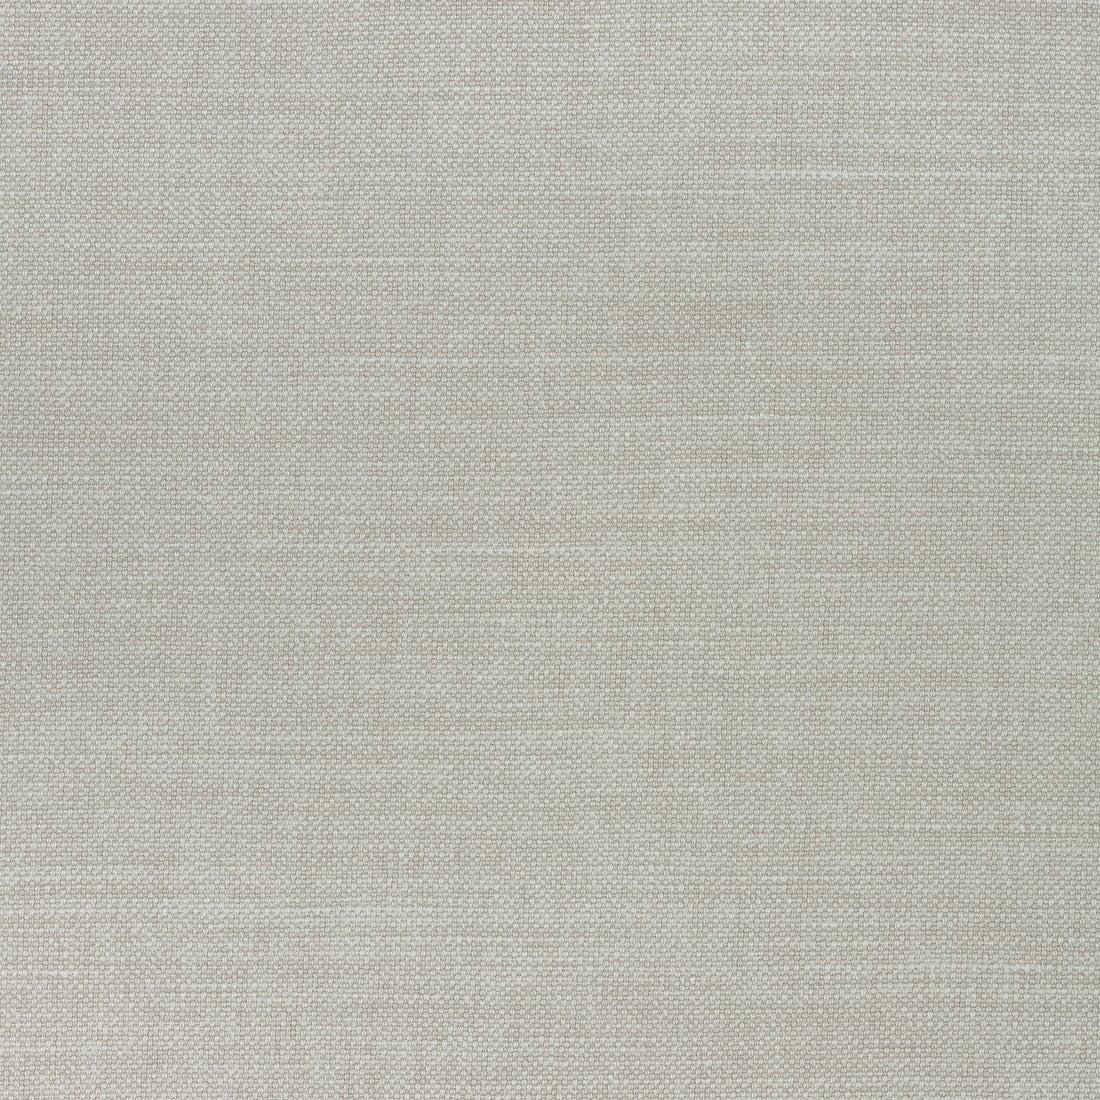 Prisma fabric in dove color - pattern number W70120 - by Thibaut in the Woven Resource Vol 12 Prisma Fabrics collection